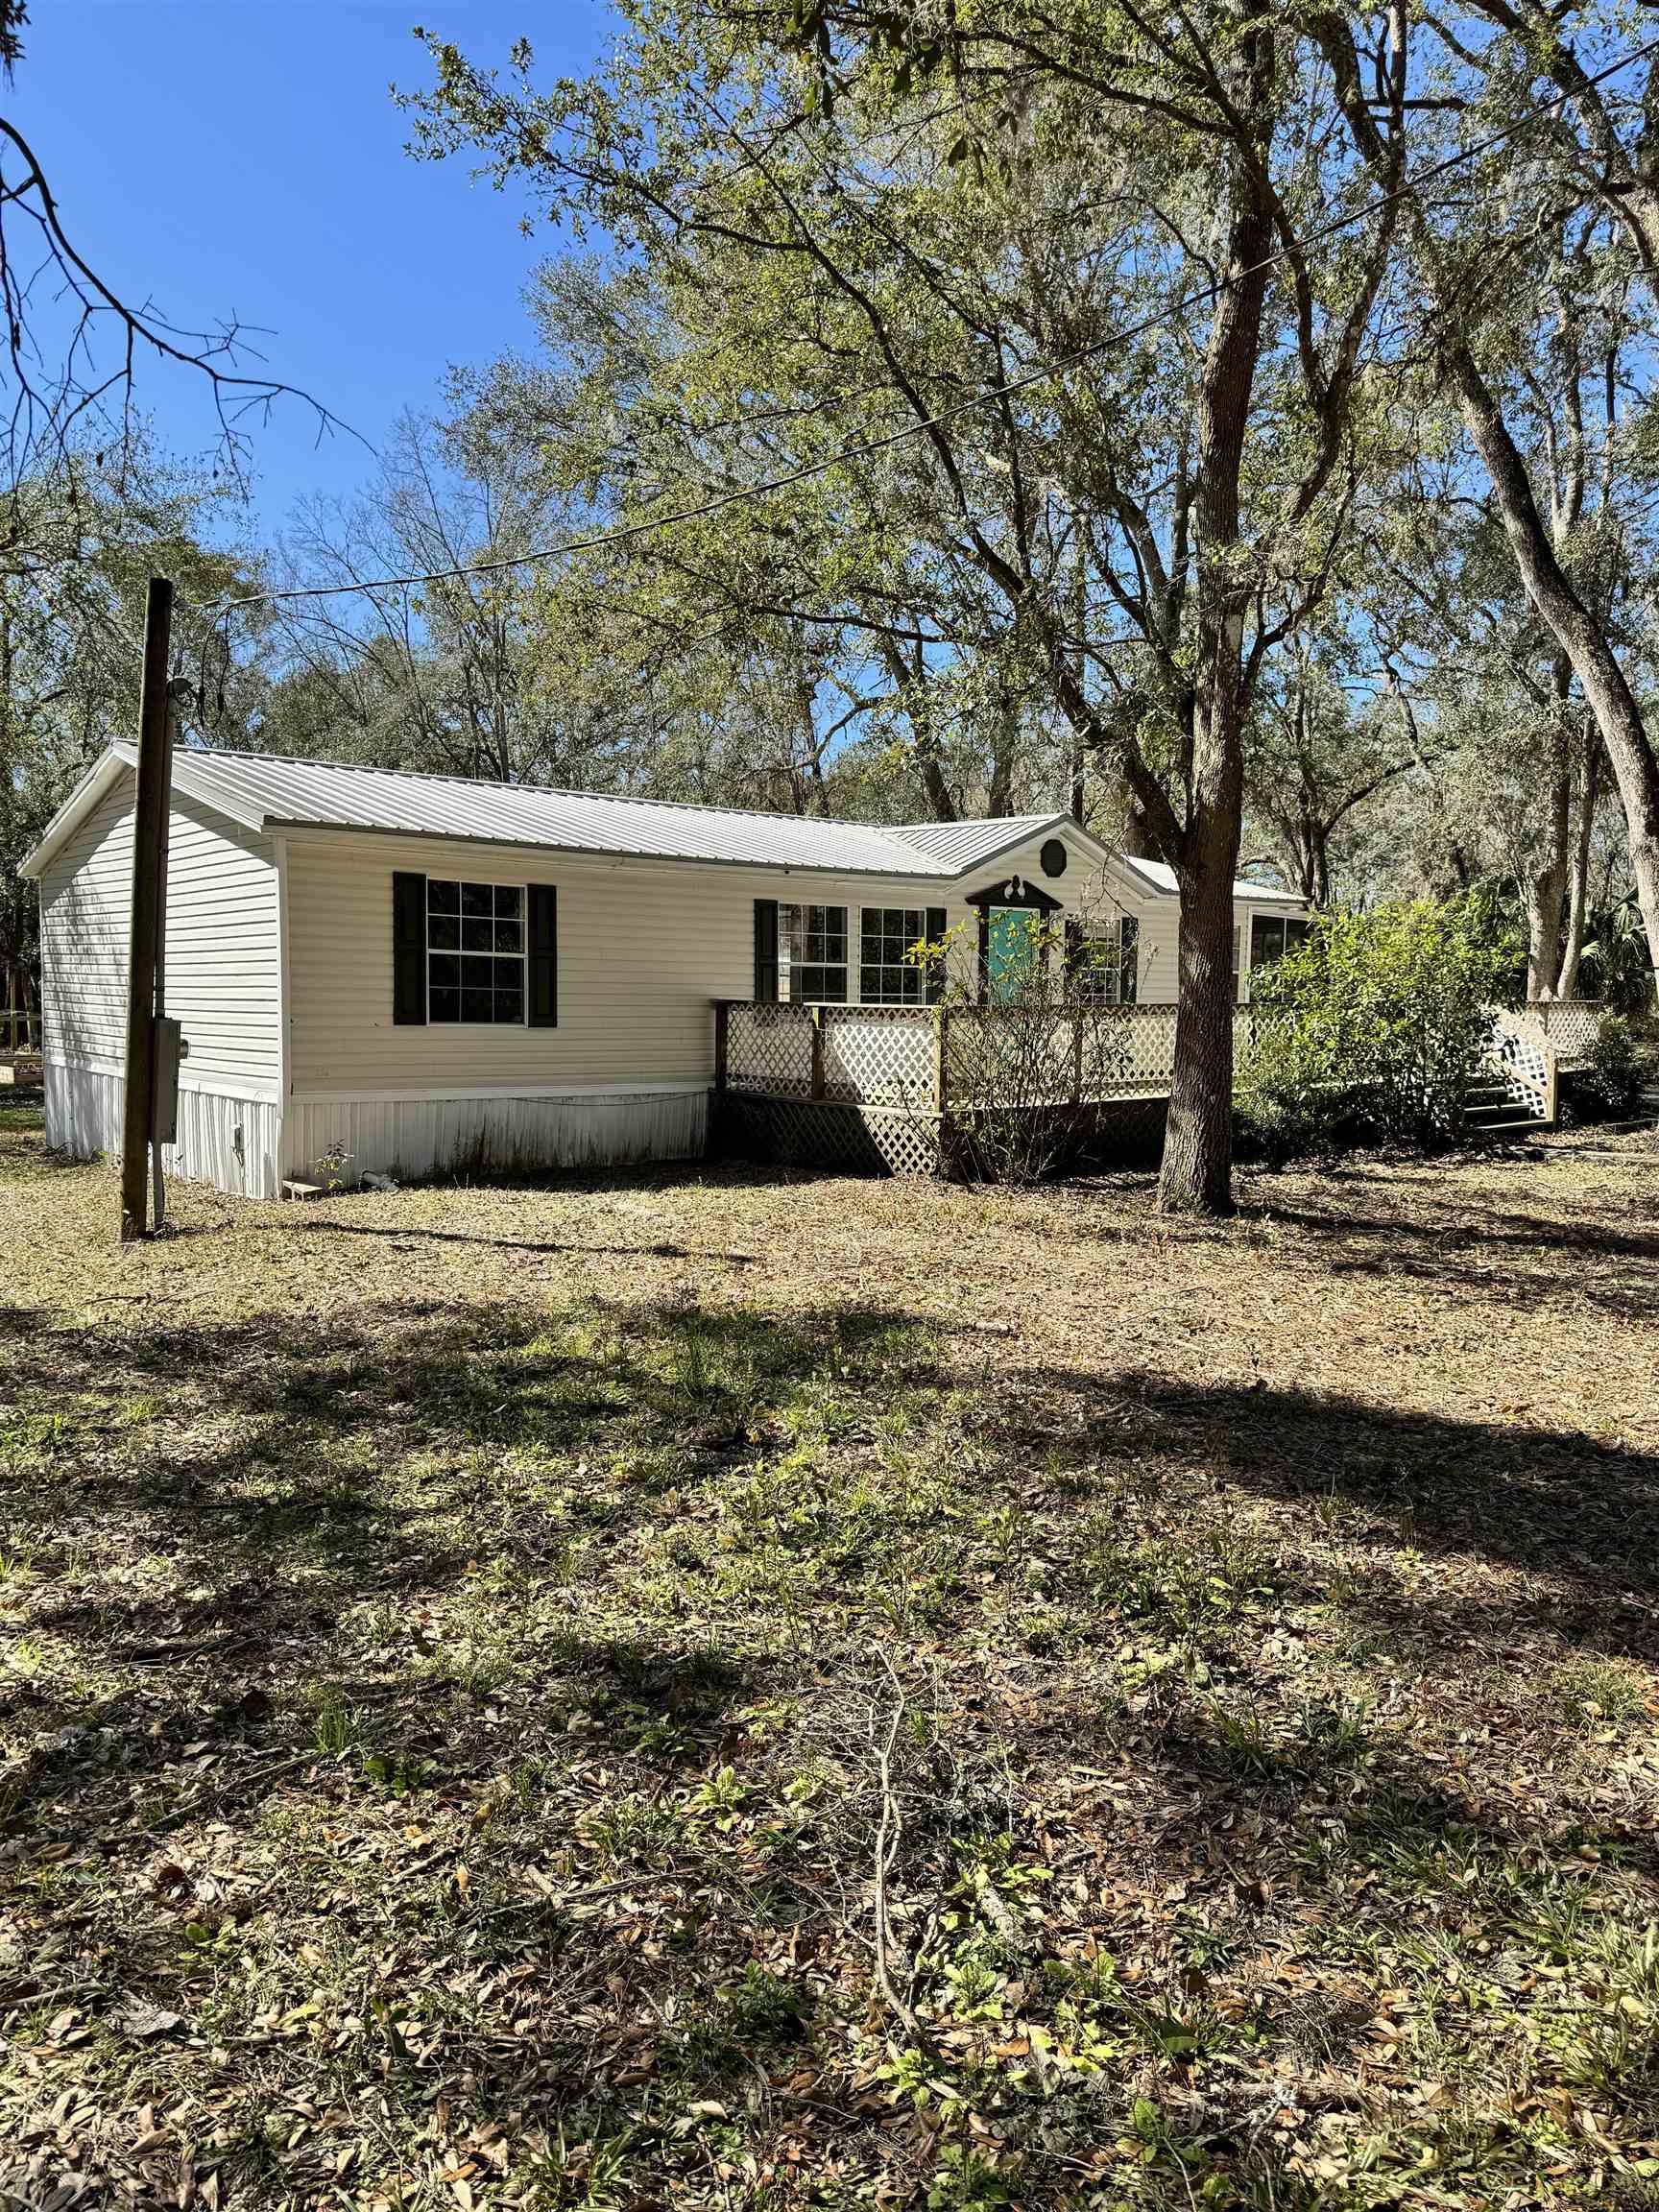 3531 Whipporwill Way,PERRY,Florida 32347,3 Bedrooms Bedrooms,2 BathroomsBathrooms,Manuf/mobile home,3531 Whipporwill Way,368221